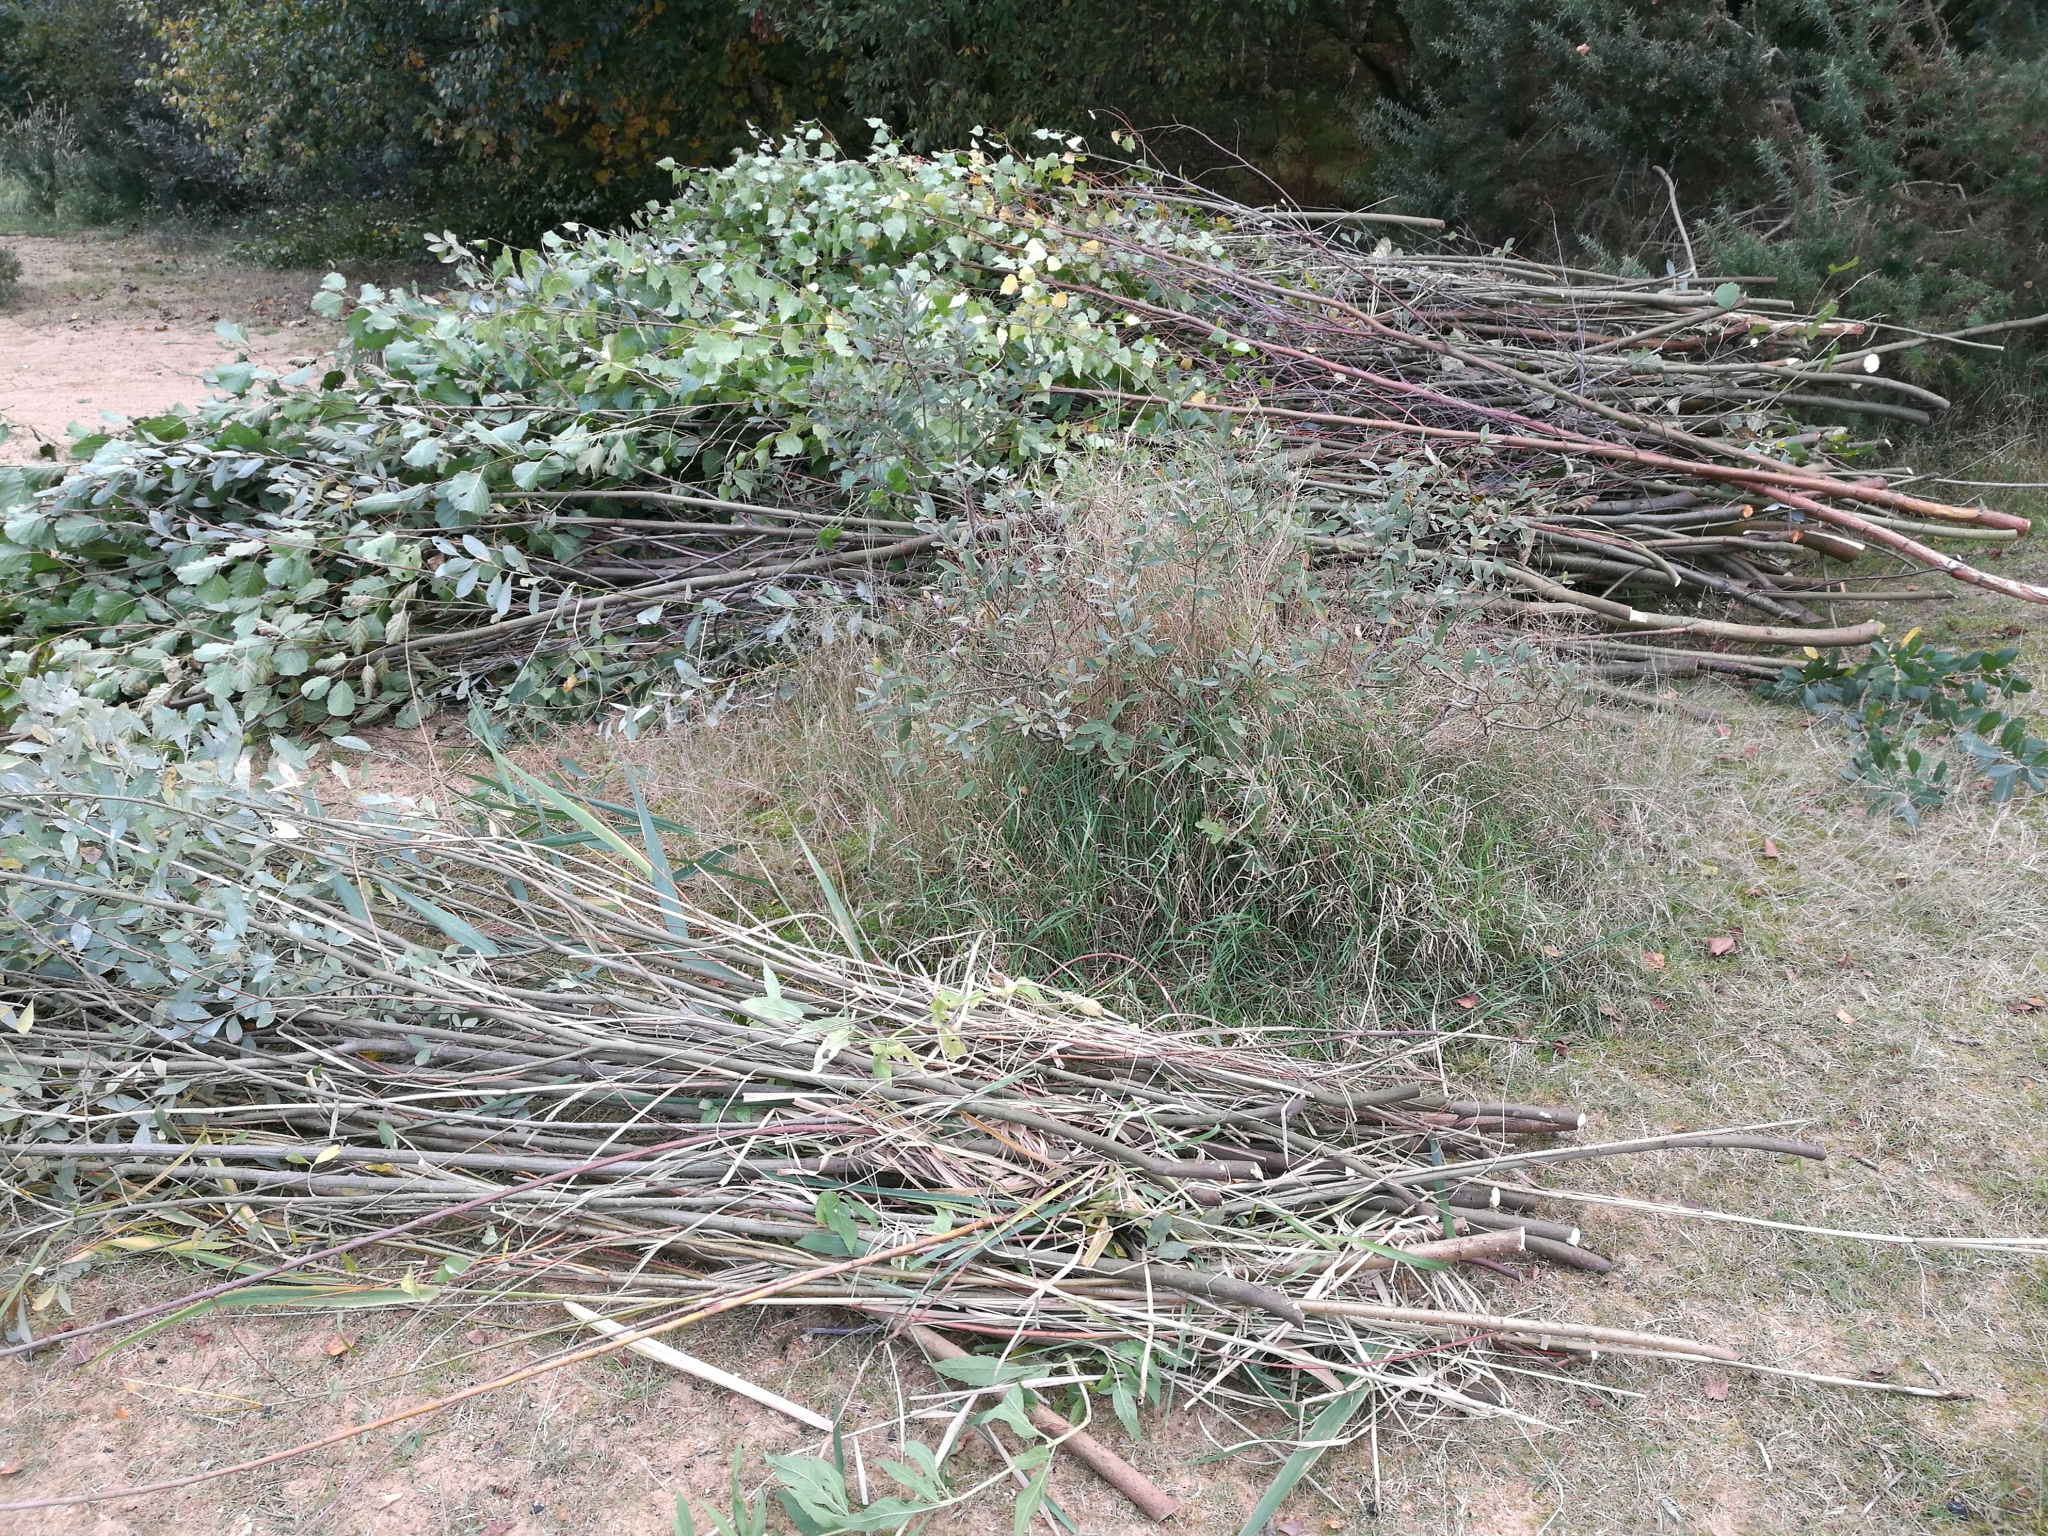 A photo from the FoTF Conservation Event - October 2021 - Coppicing and collecting material for wildlife screen : A large pile of the vegetation removed by the volunteers lays on the ground